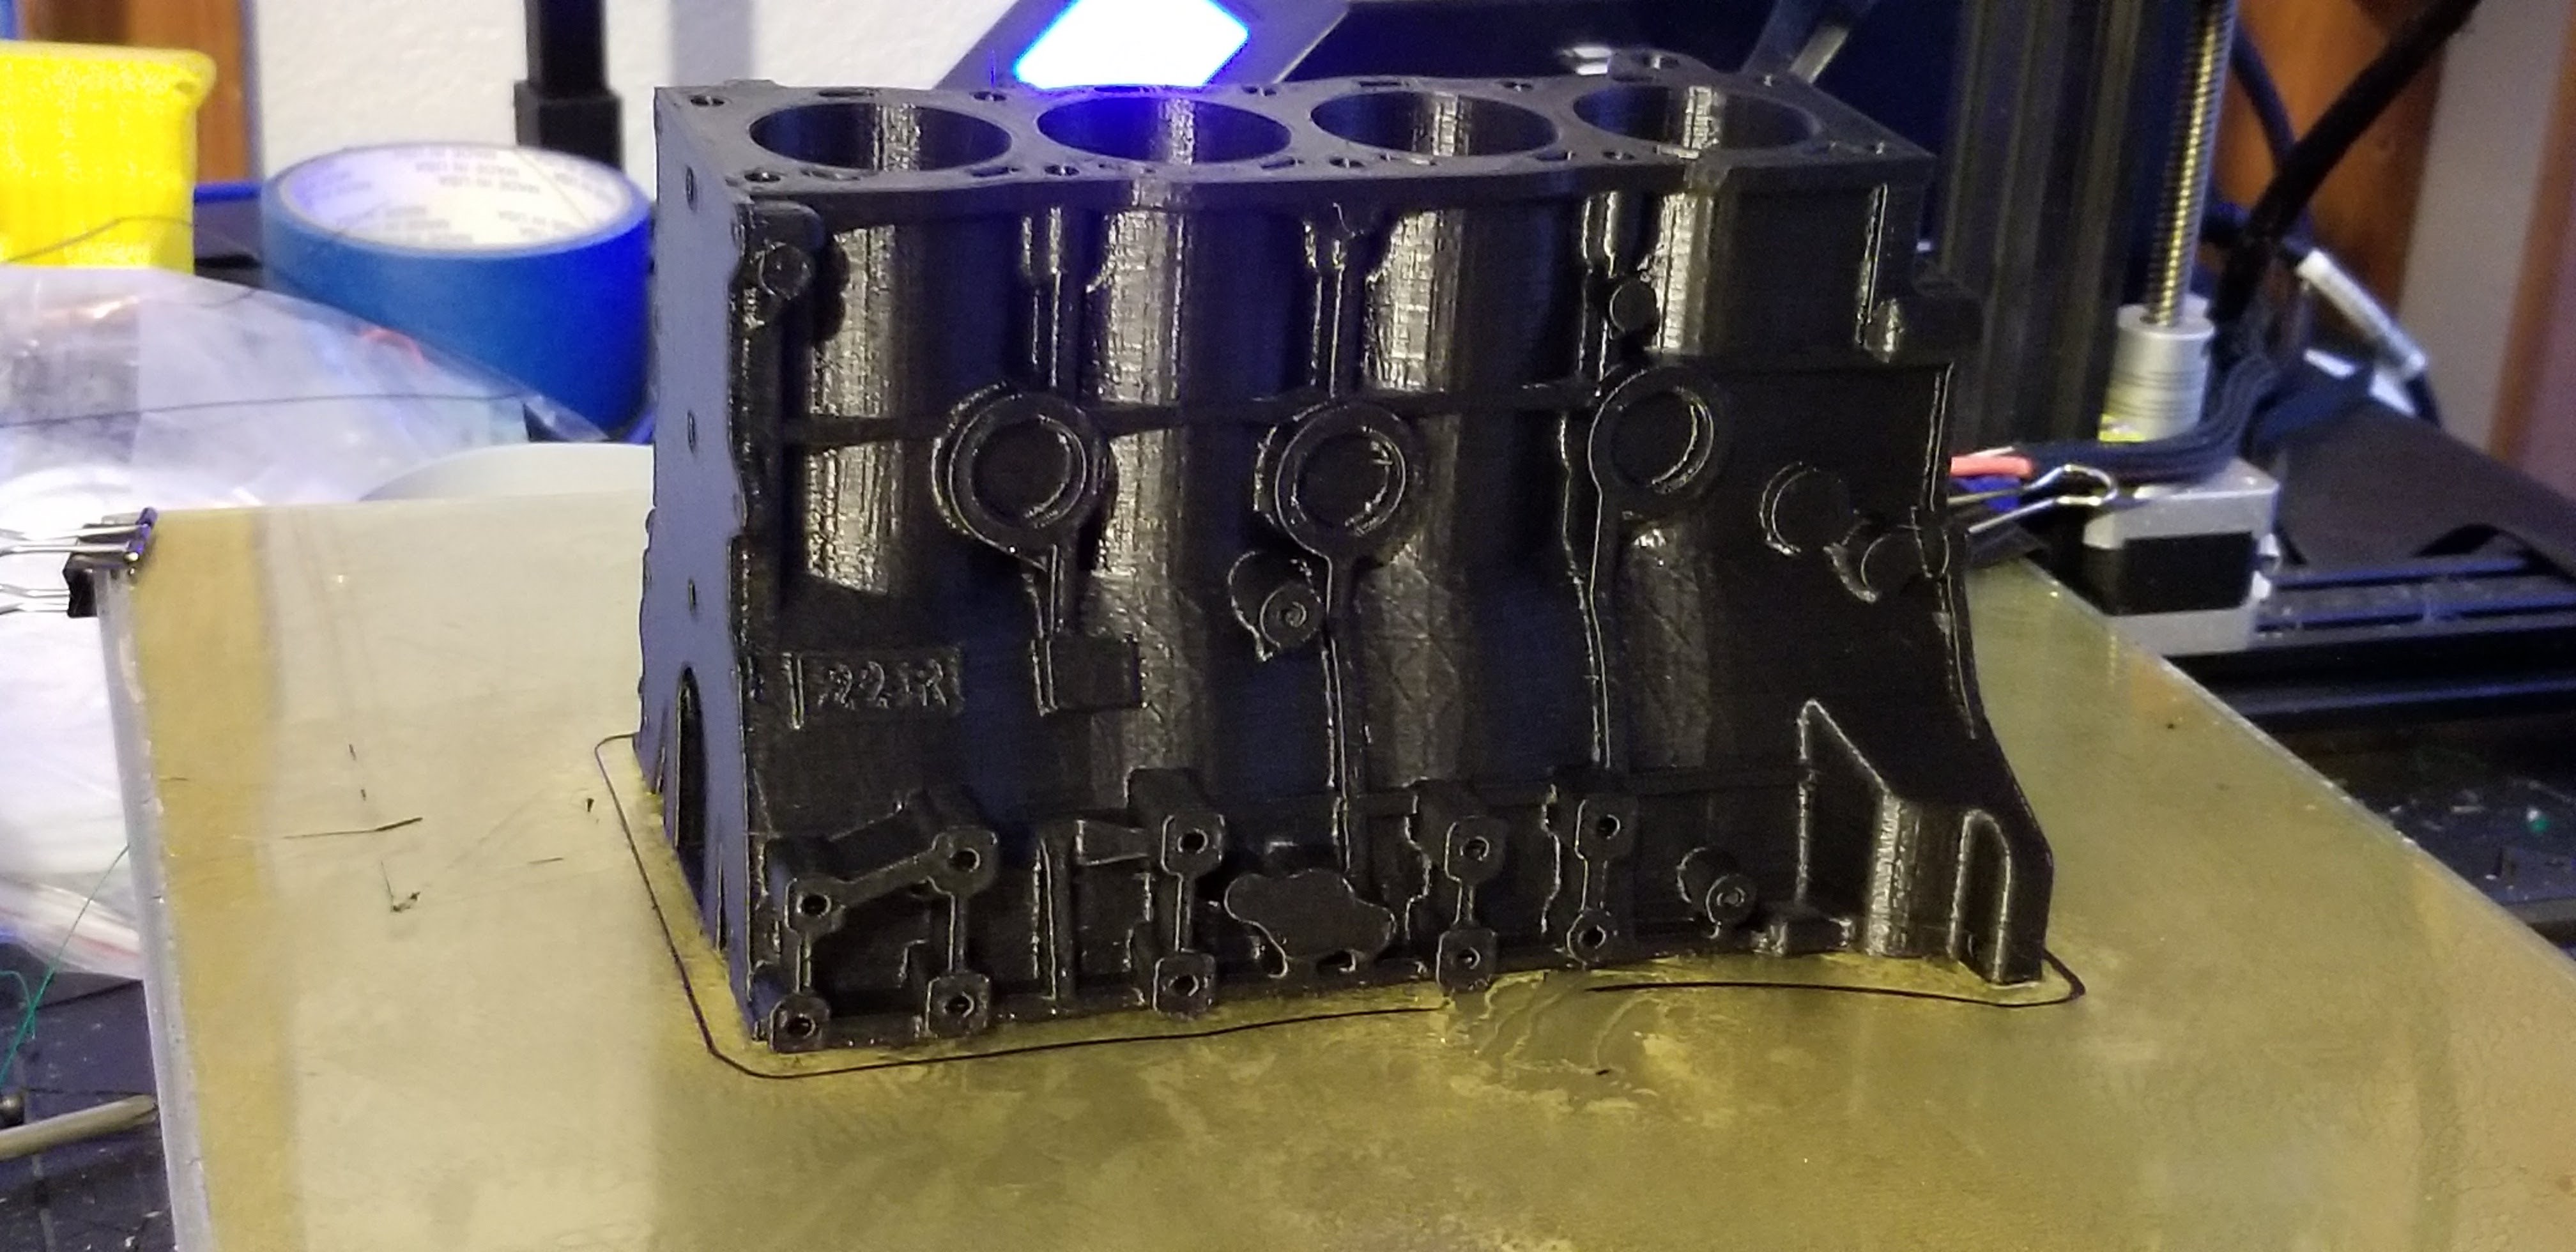 With a PEI sheet you can print ABS even without an enclosure